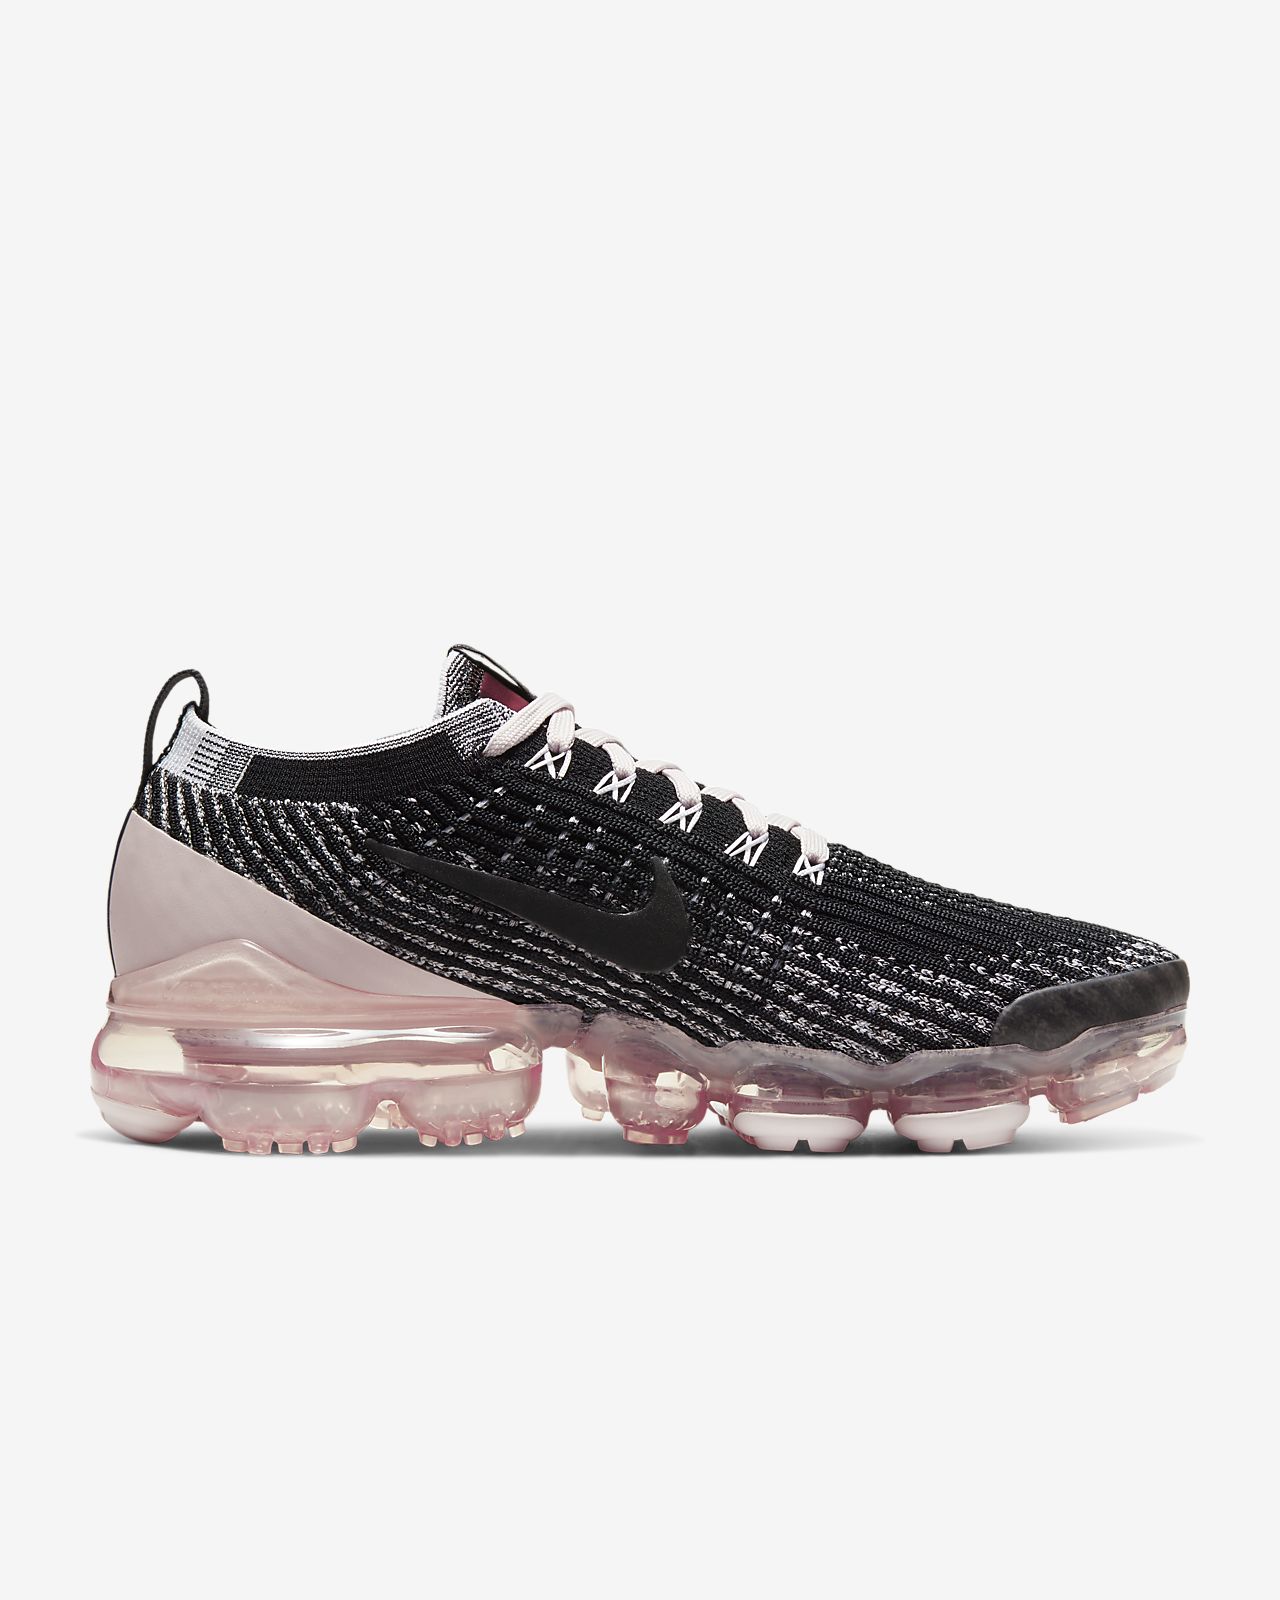 vapormax flyknit pink and black